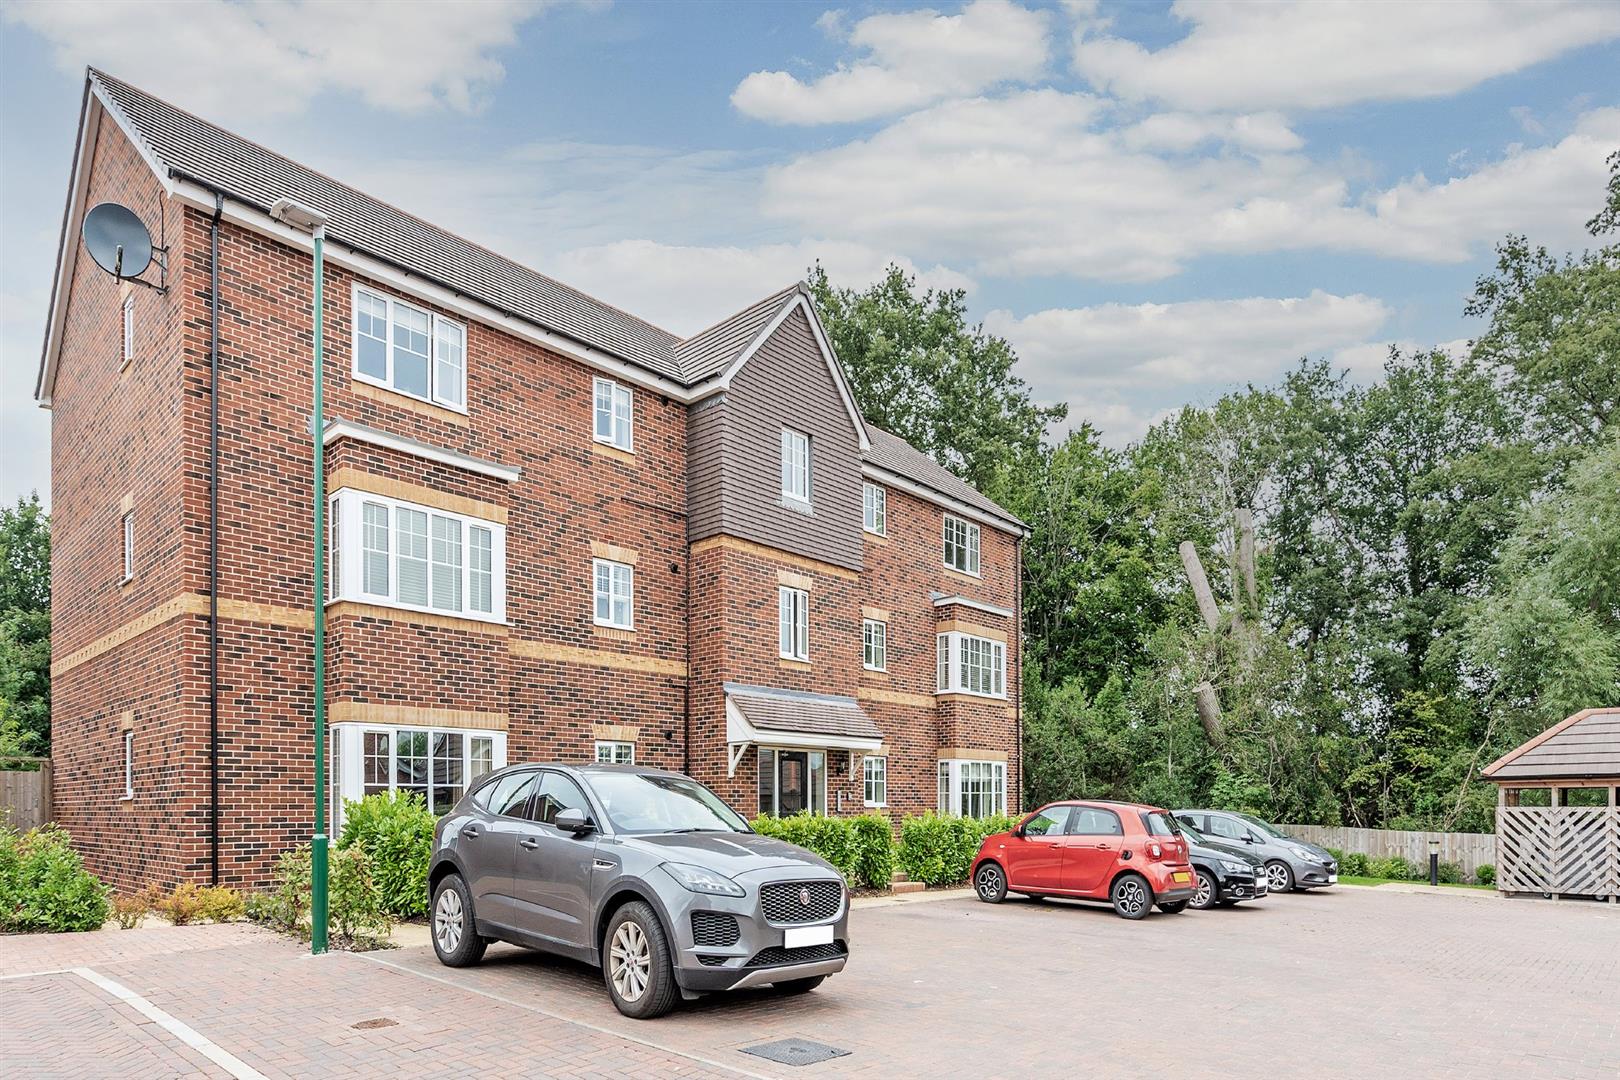 2 bed  for sale in Hertford Way, Solihull, B93 